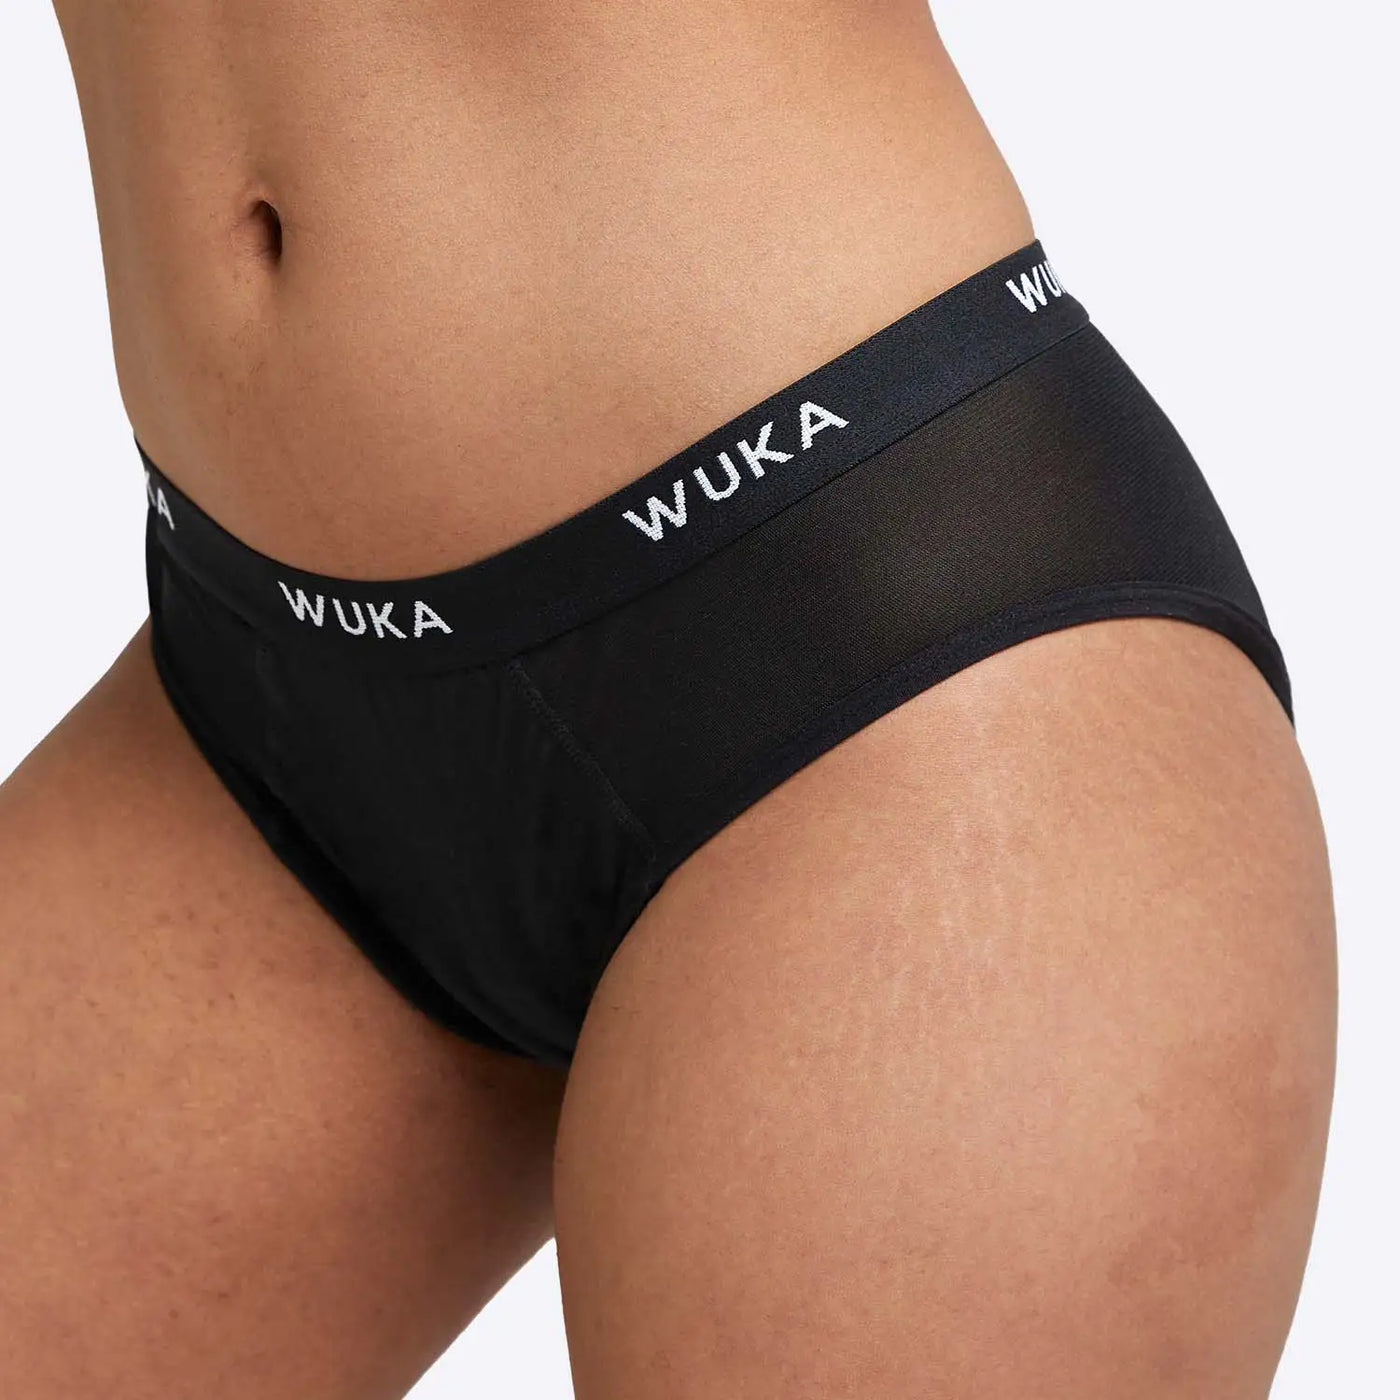 How To Get Period Blood Out Of Your Underwear – WUKA